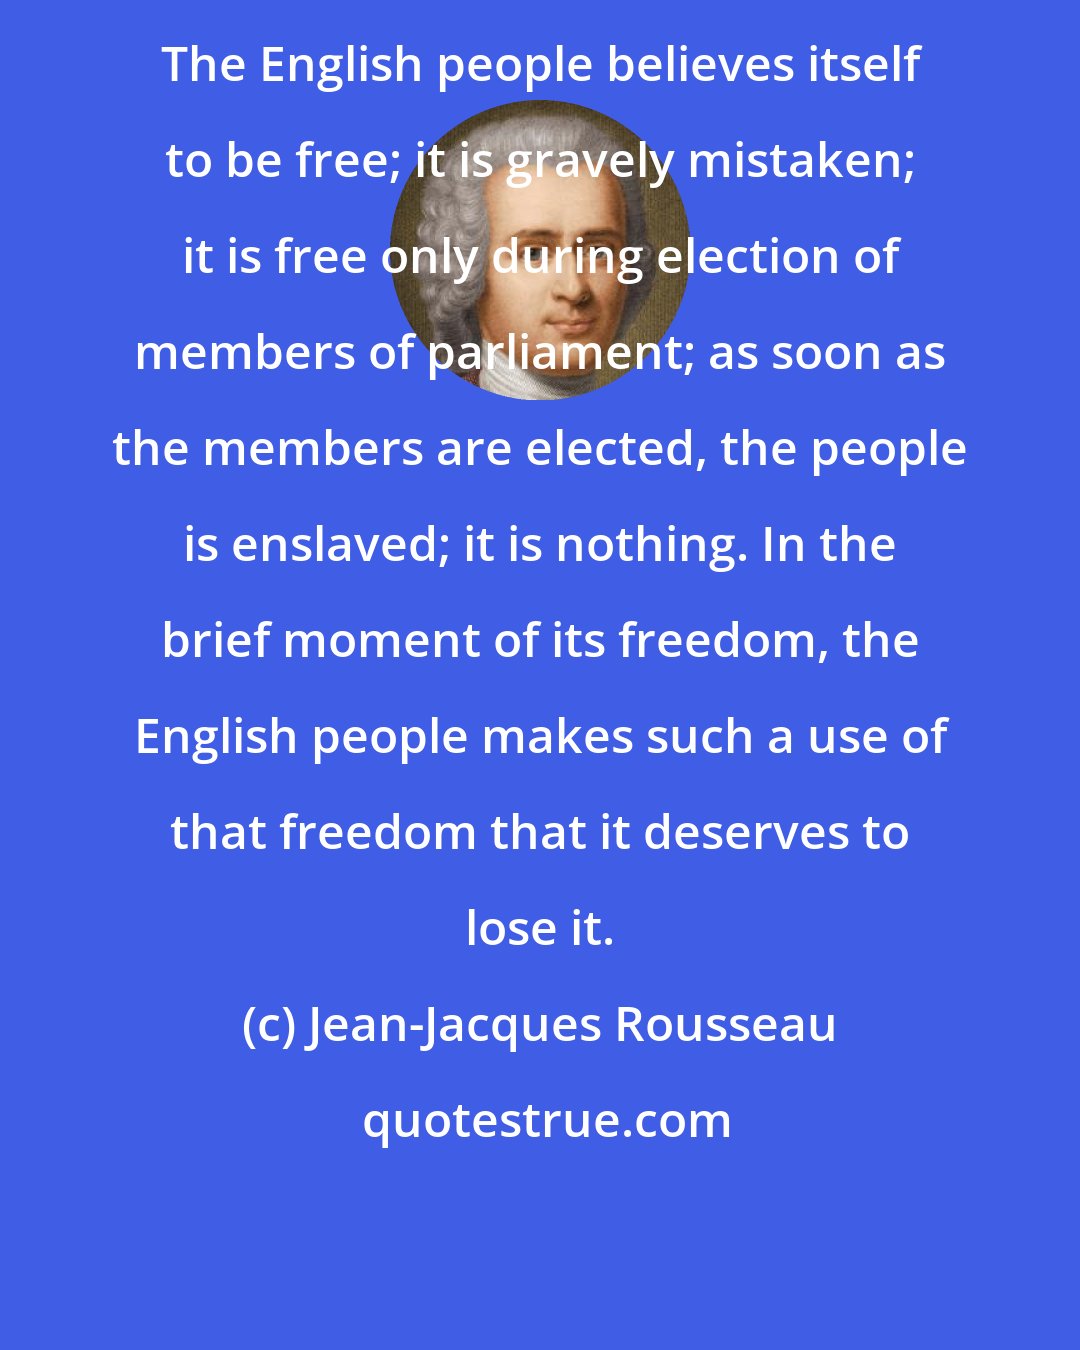 Jean-Jacques Rousseau: The English people believes itself to be free; it is gravely mistaken; it is free only during election of members of parliament; as soon as the members are elected, the people is enslaved; it is nothing. In the brief moment of its freedom, the English people makes such a use of that freedom that it deserves to lose it.